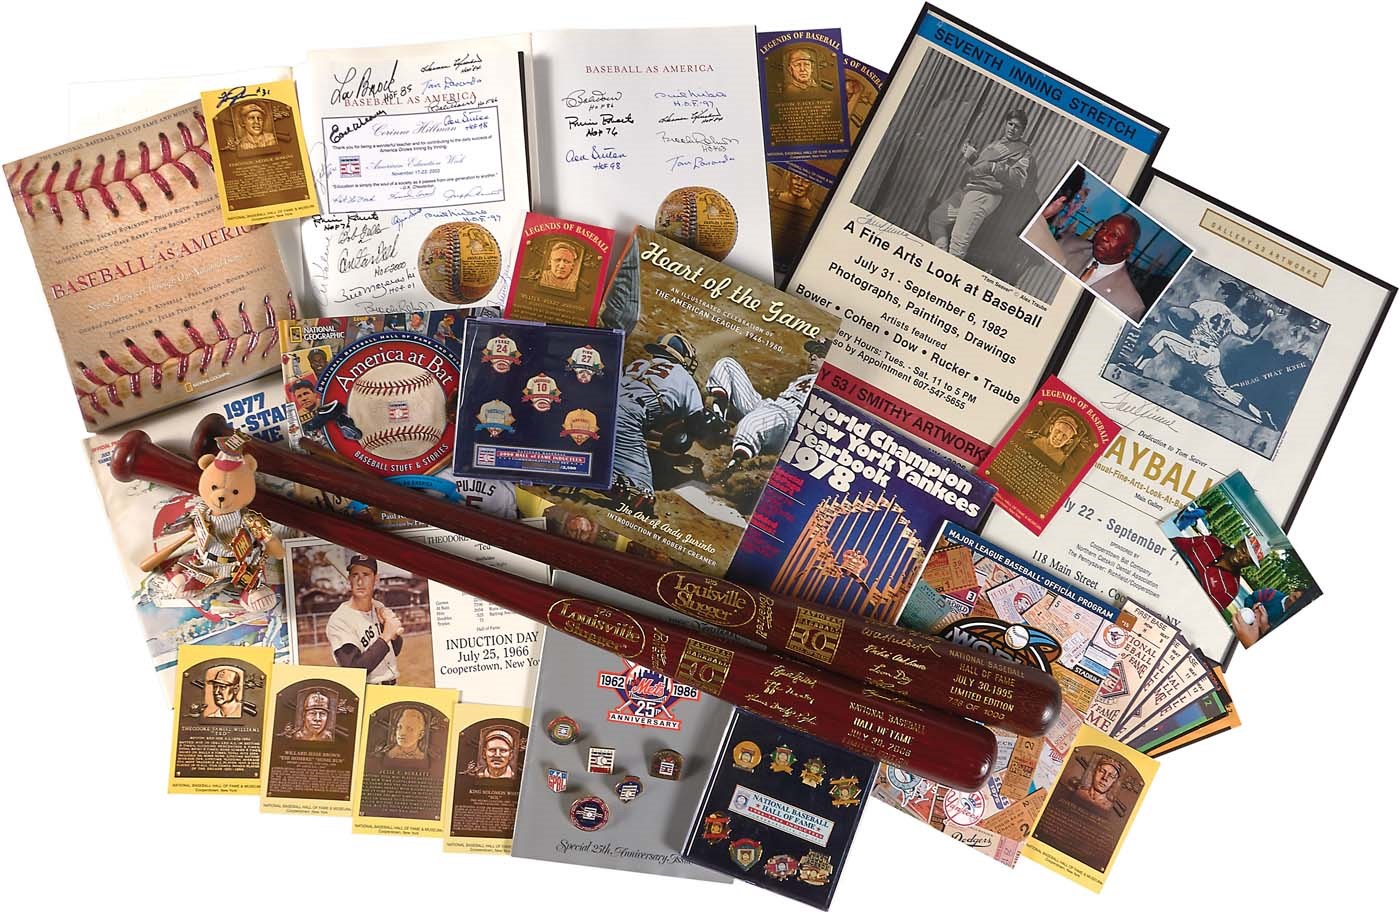 Baseball Autographs - Massive Hall of Fame Collection with Autographs from Cooperstown Employee (1000+)